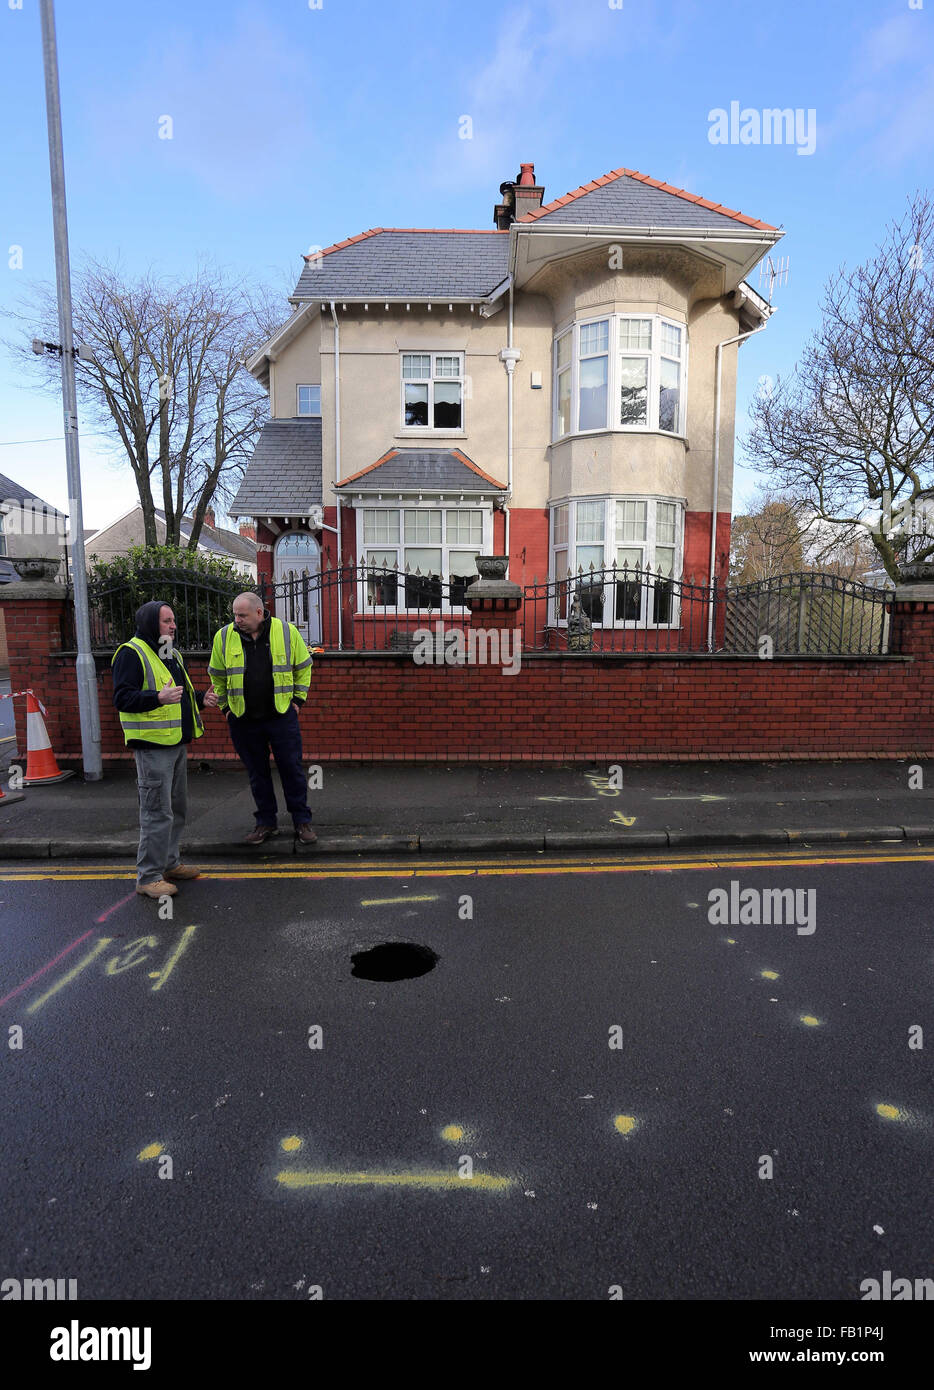 Neath, UK. Thursday 07 January 2016 Council officials by the sinkhole in Cimla Road, Neath Re: A sinkhole up to 10ft deep has appeared in Neath. south Wales, leading to the closure of a main road. Police have sealed off Cimla Road, in Neath, following the discovery at the bottom of Cimla Hill. South Wales Police and Neath Port Talbot council workers are currently at the scene assessing the damage and preparing to carry out emergency repairs. Credit:  D Legakis/Alamy Live News Stock Photo